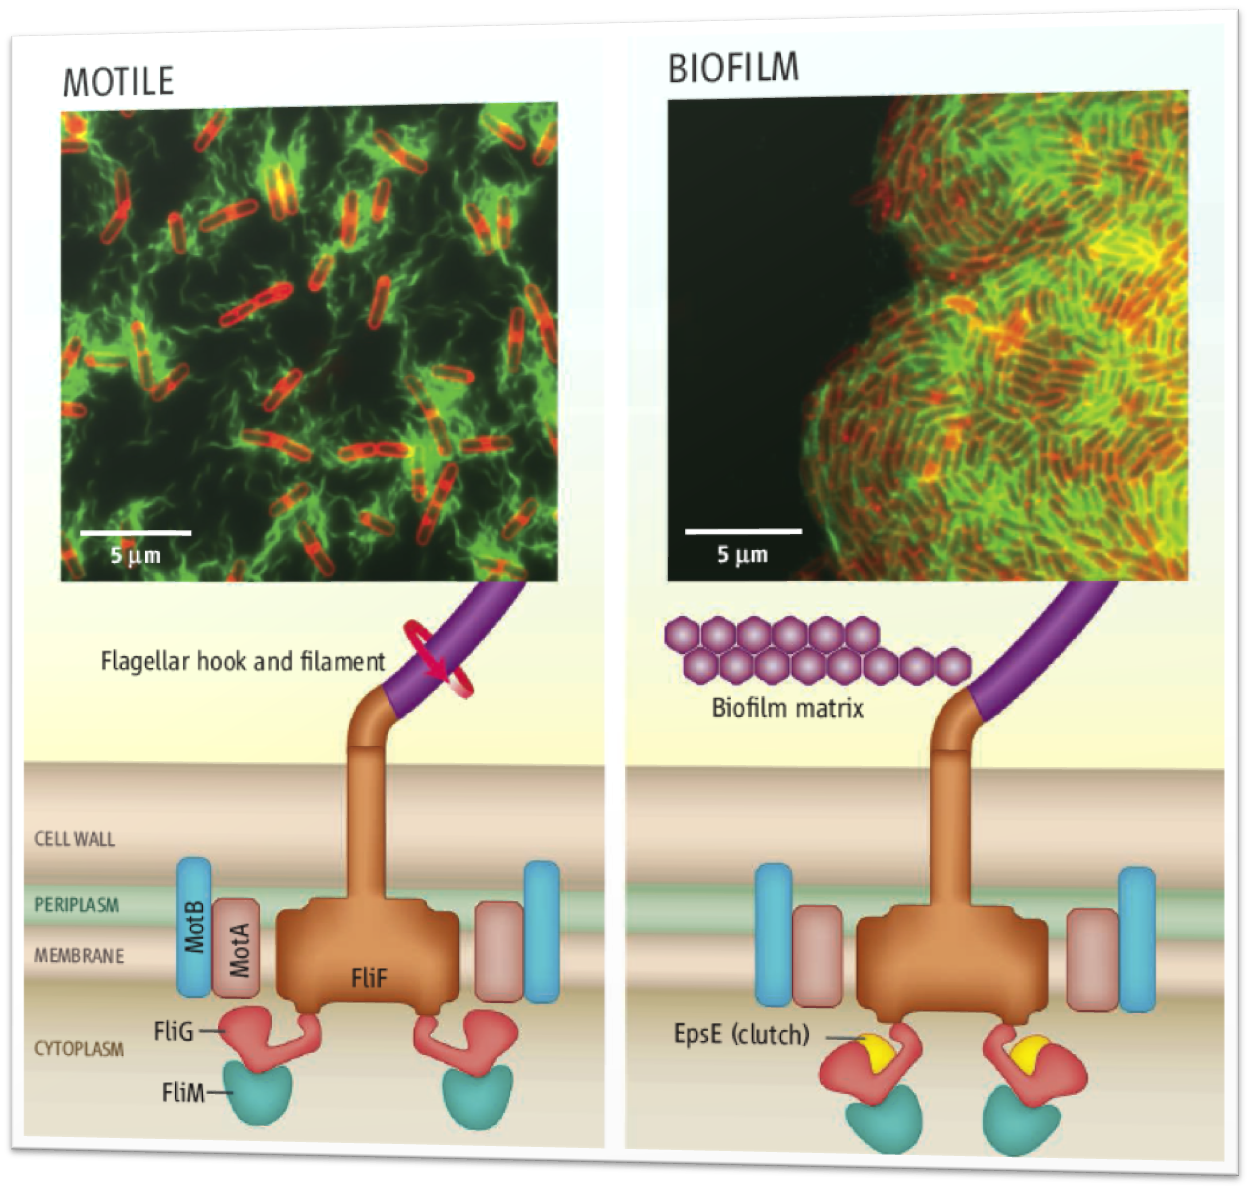 Motile B. subtilis cells are powered by interactions between protein complexes, generating torque for locomotion. The protein EpsE acts as a molecular clutch to disengage the flagellar motor, leaving the flagellum intact but unpowered. This quickly halts locomotion[http://www.sciencemag.org/cgi/reprint/320/5883/1599.pdf]